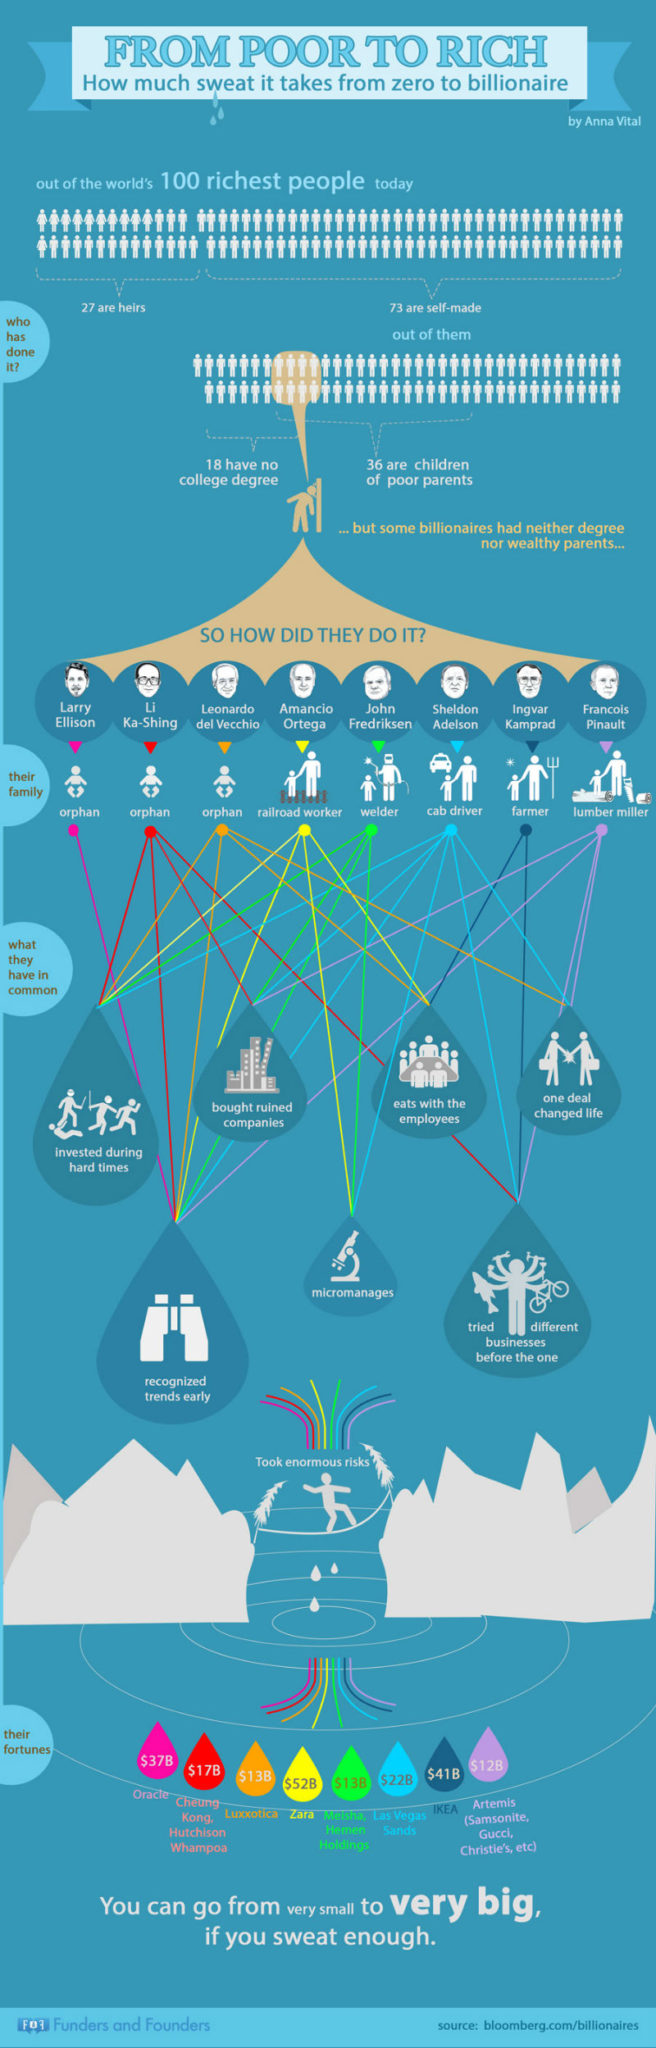 from-poor-to-rich-billionare-infographic (1)